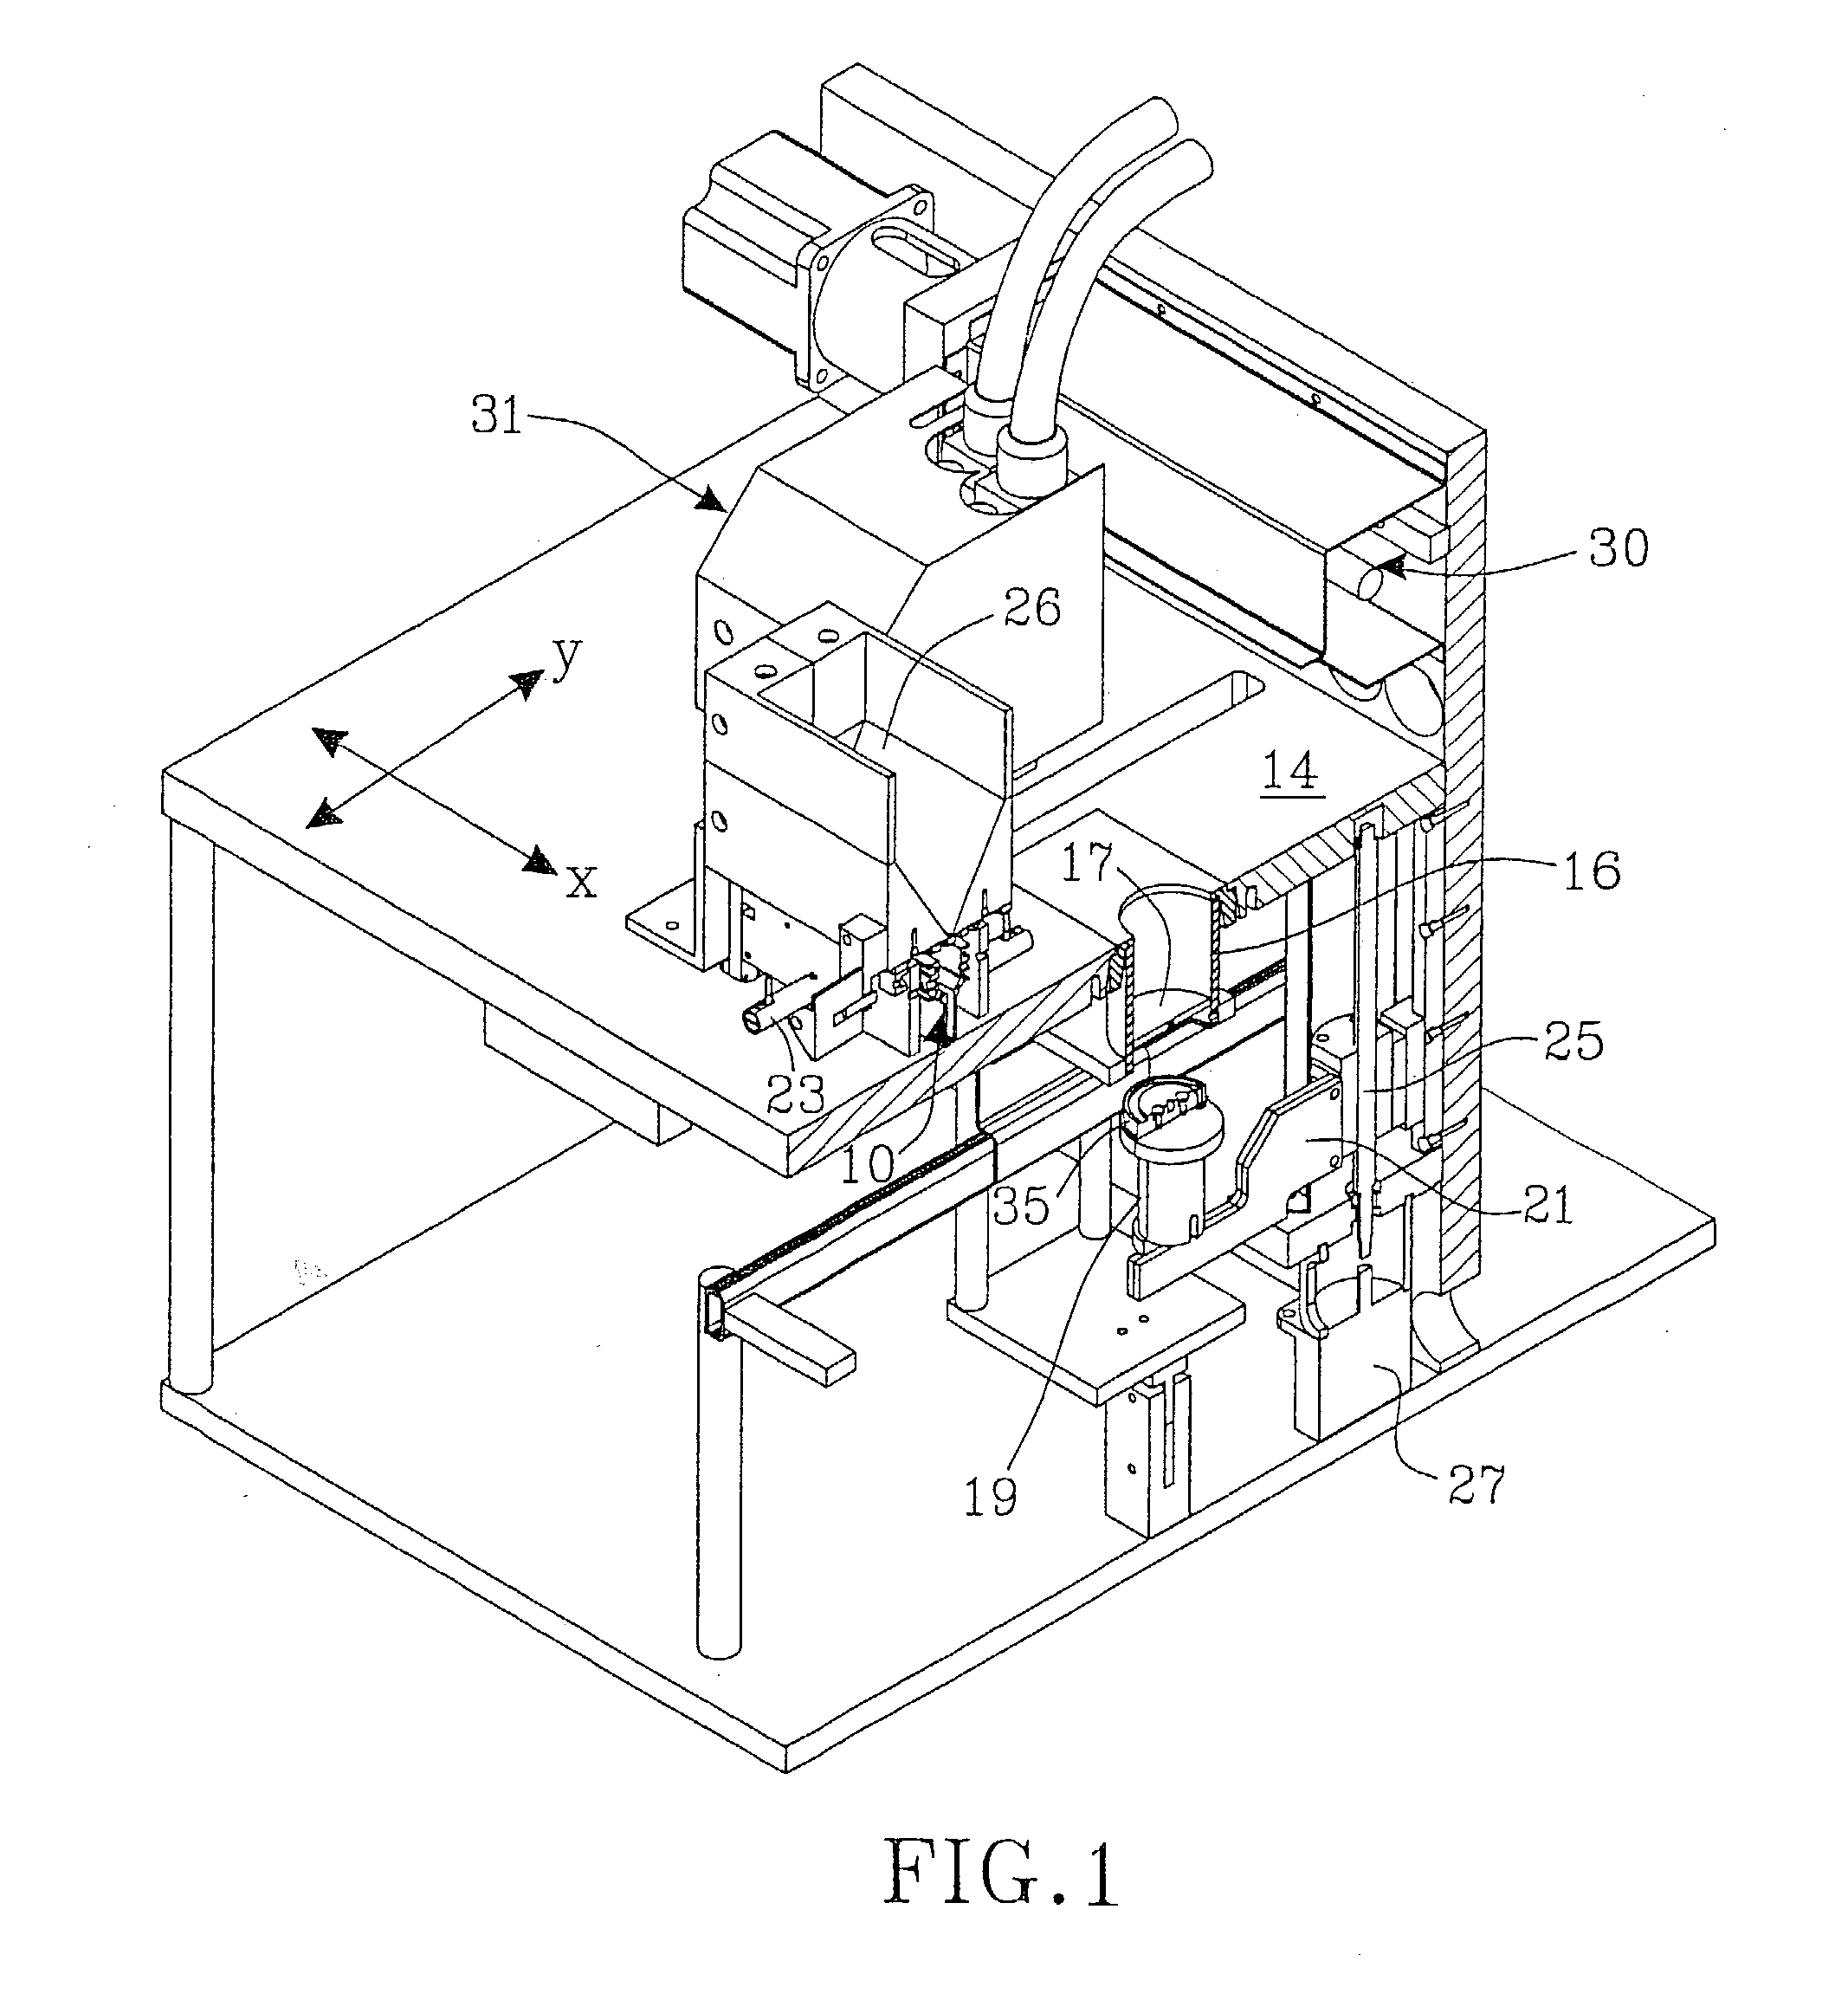 Method and apparatus for producing free-form products